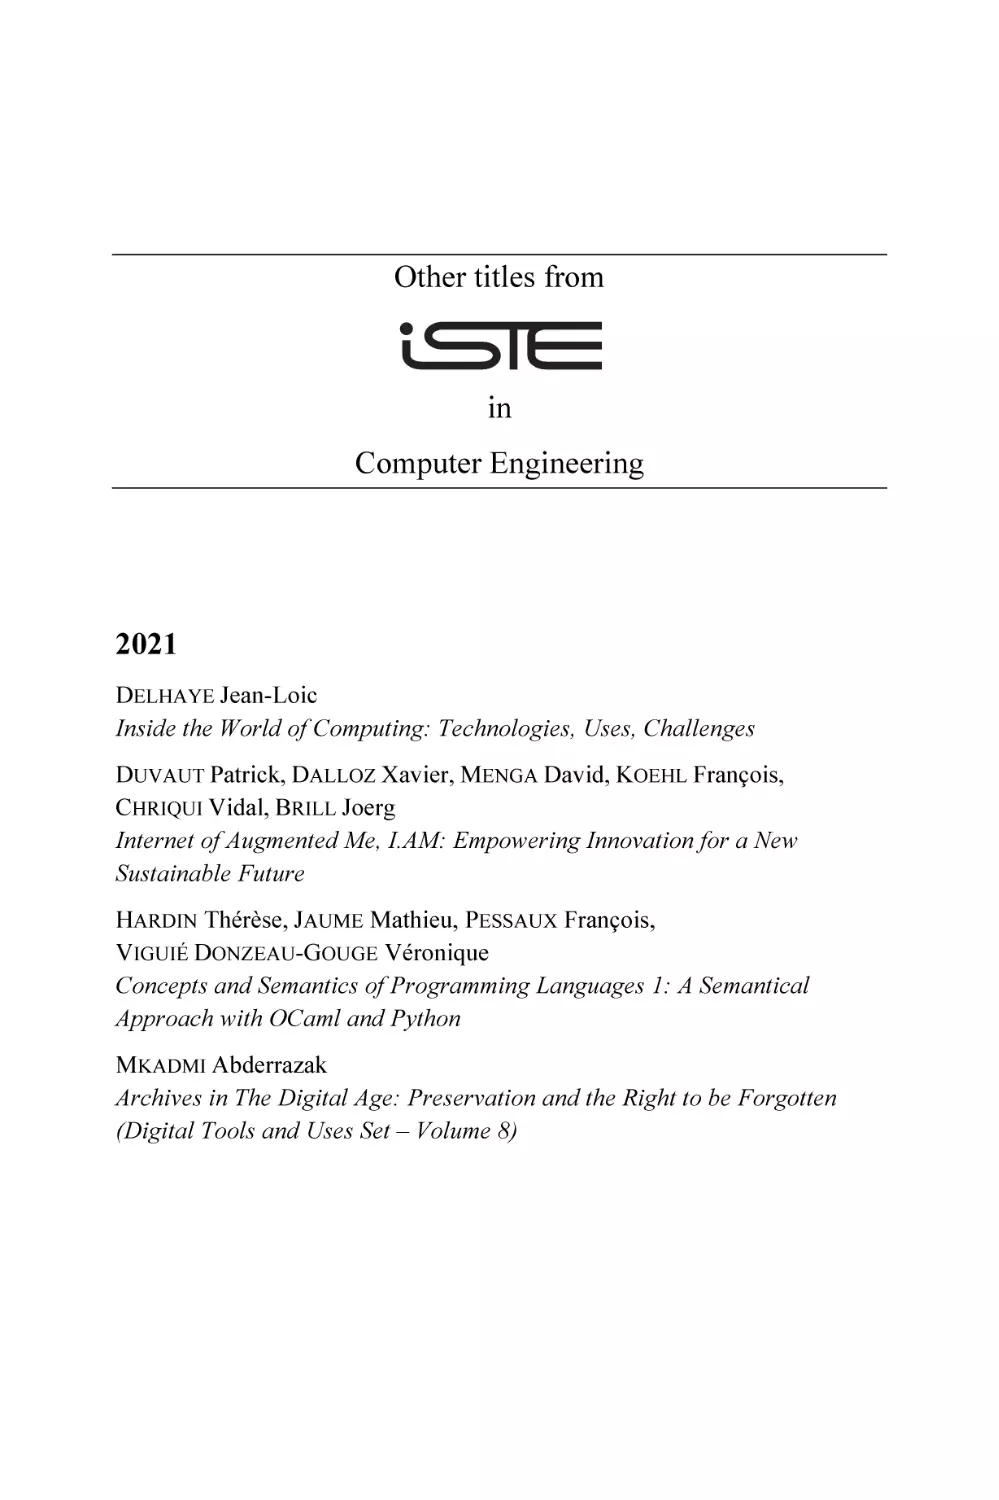 Other titles from iSTE in Computer Engineering